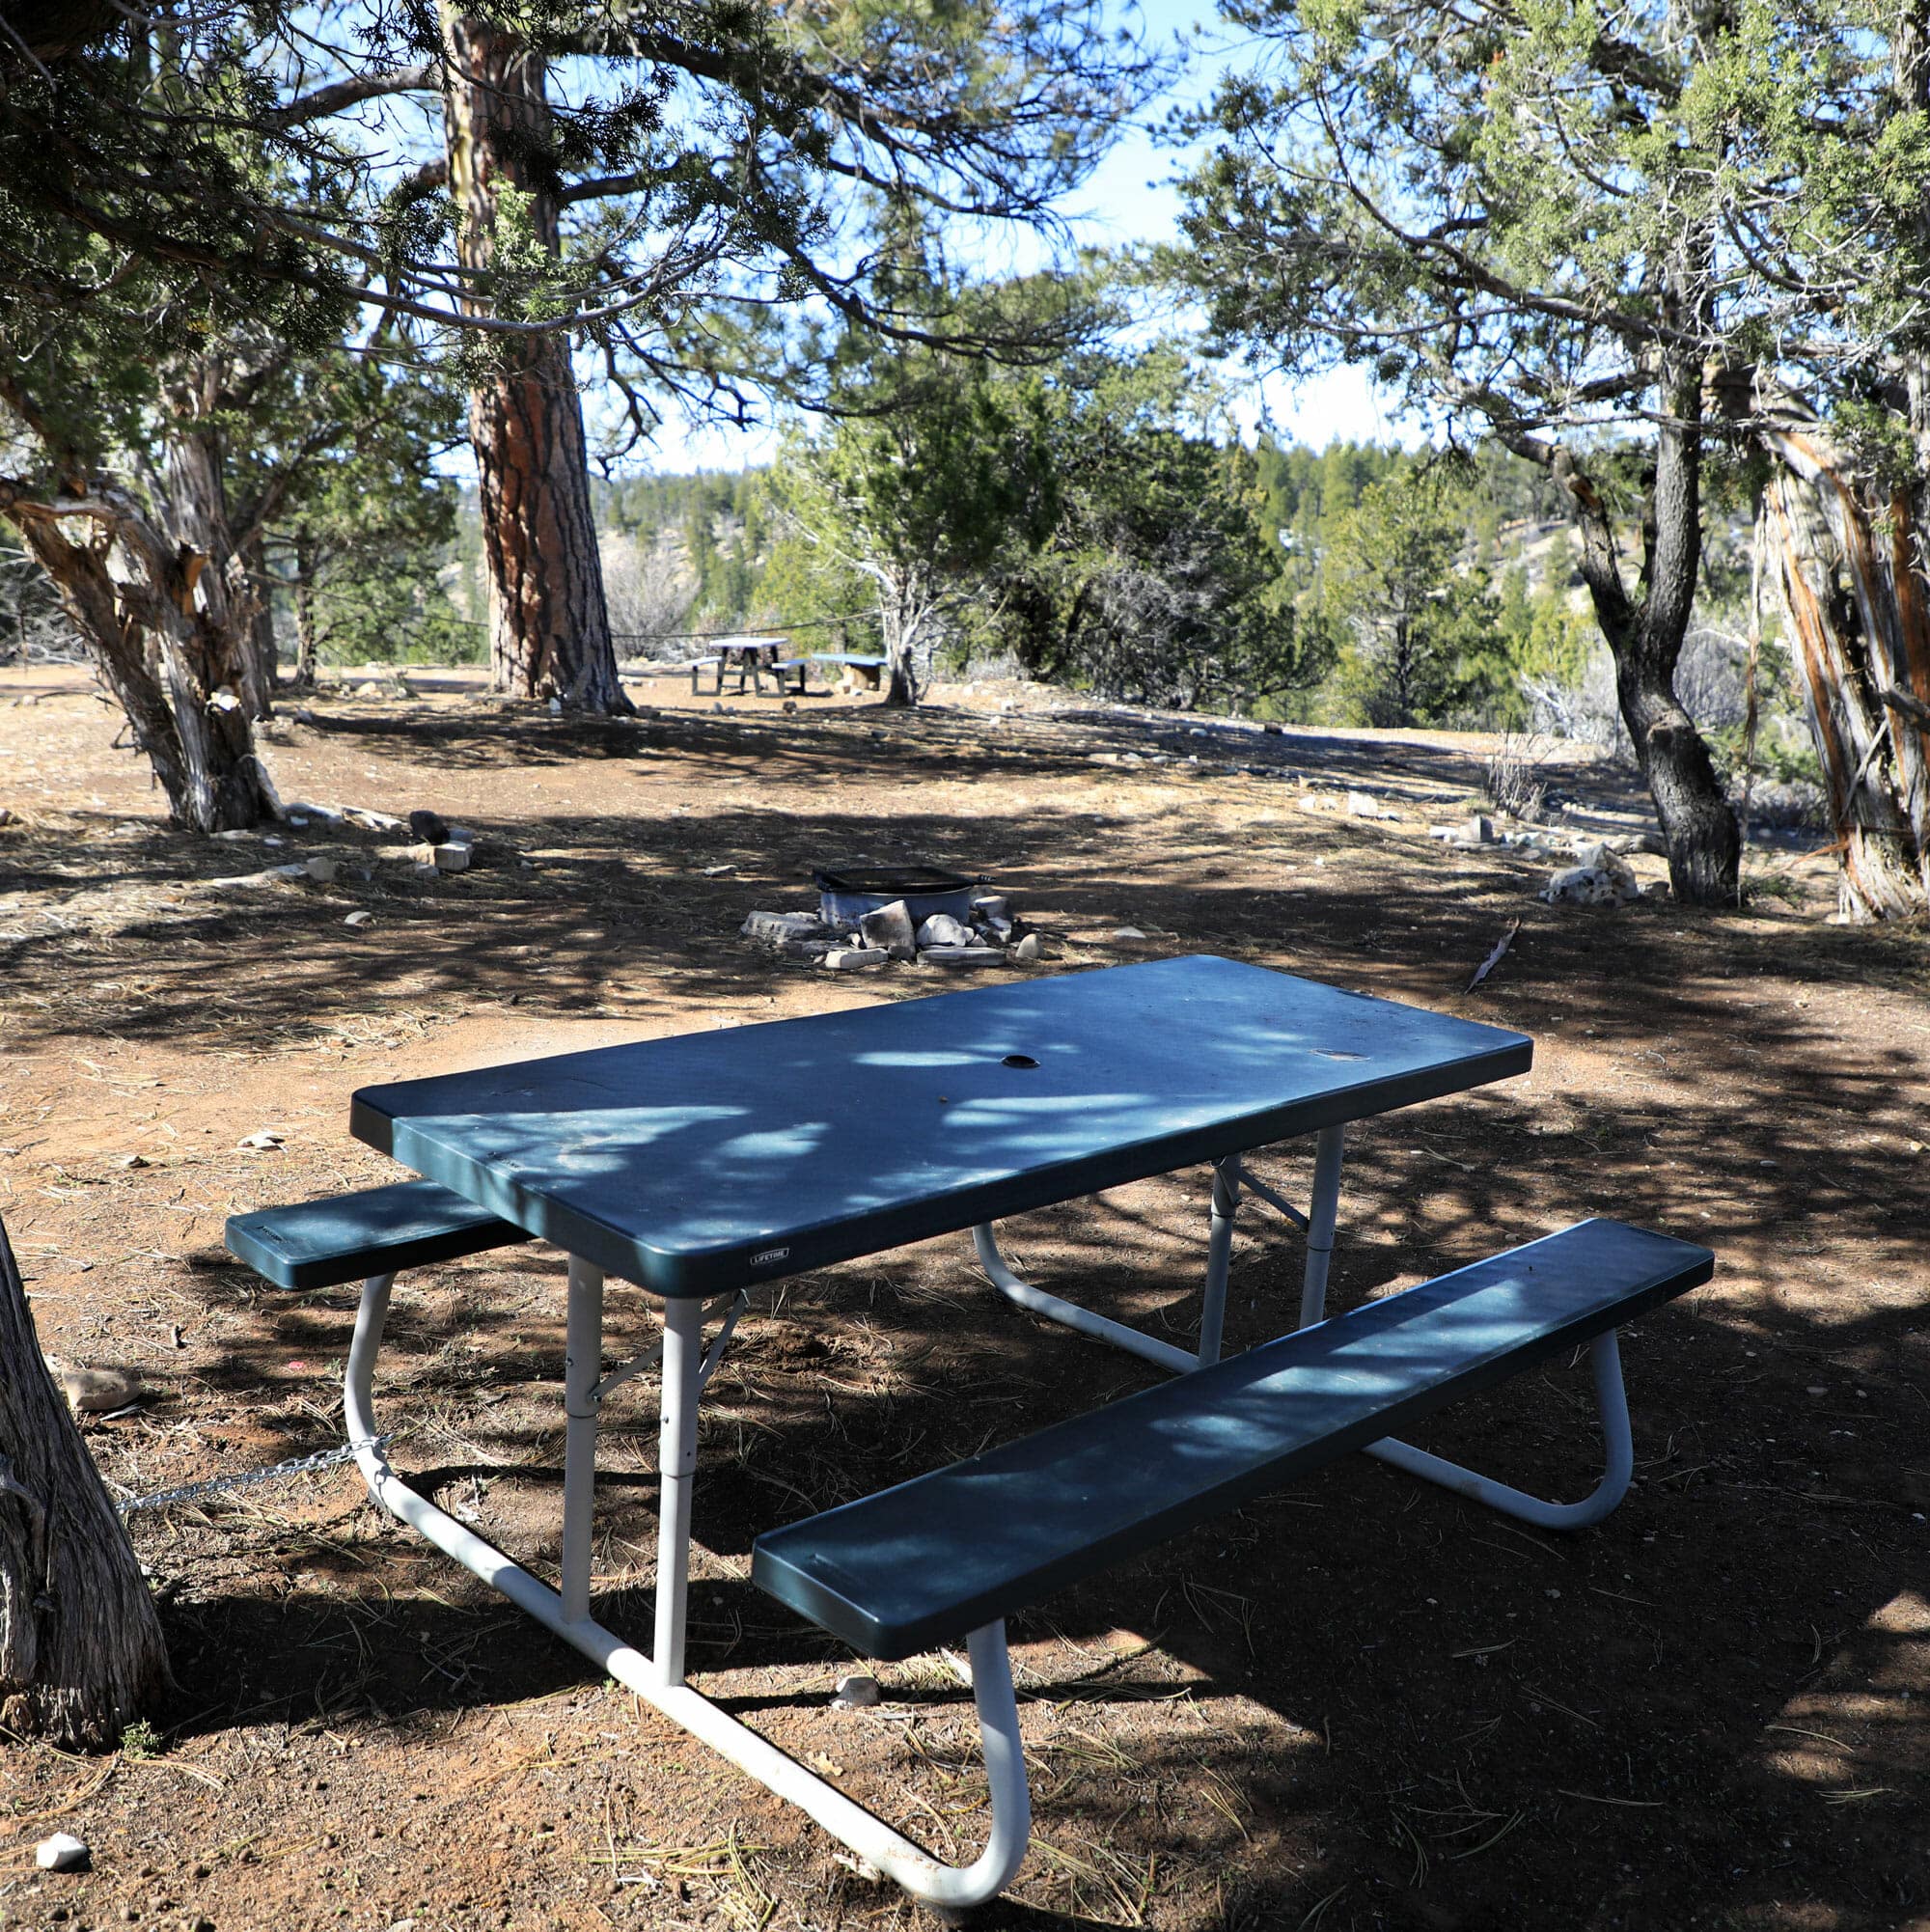 Worried about where to eat breakfast? Be at ease, all of our Zion campsites come with picnic a table.